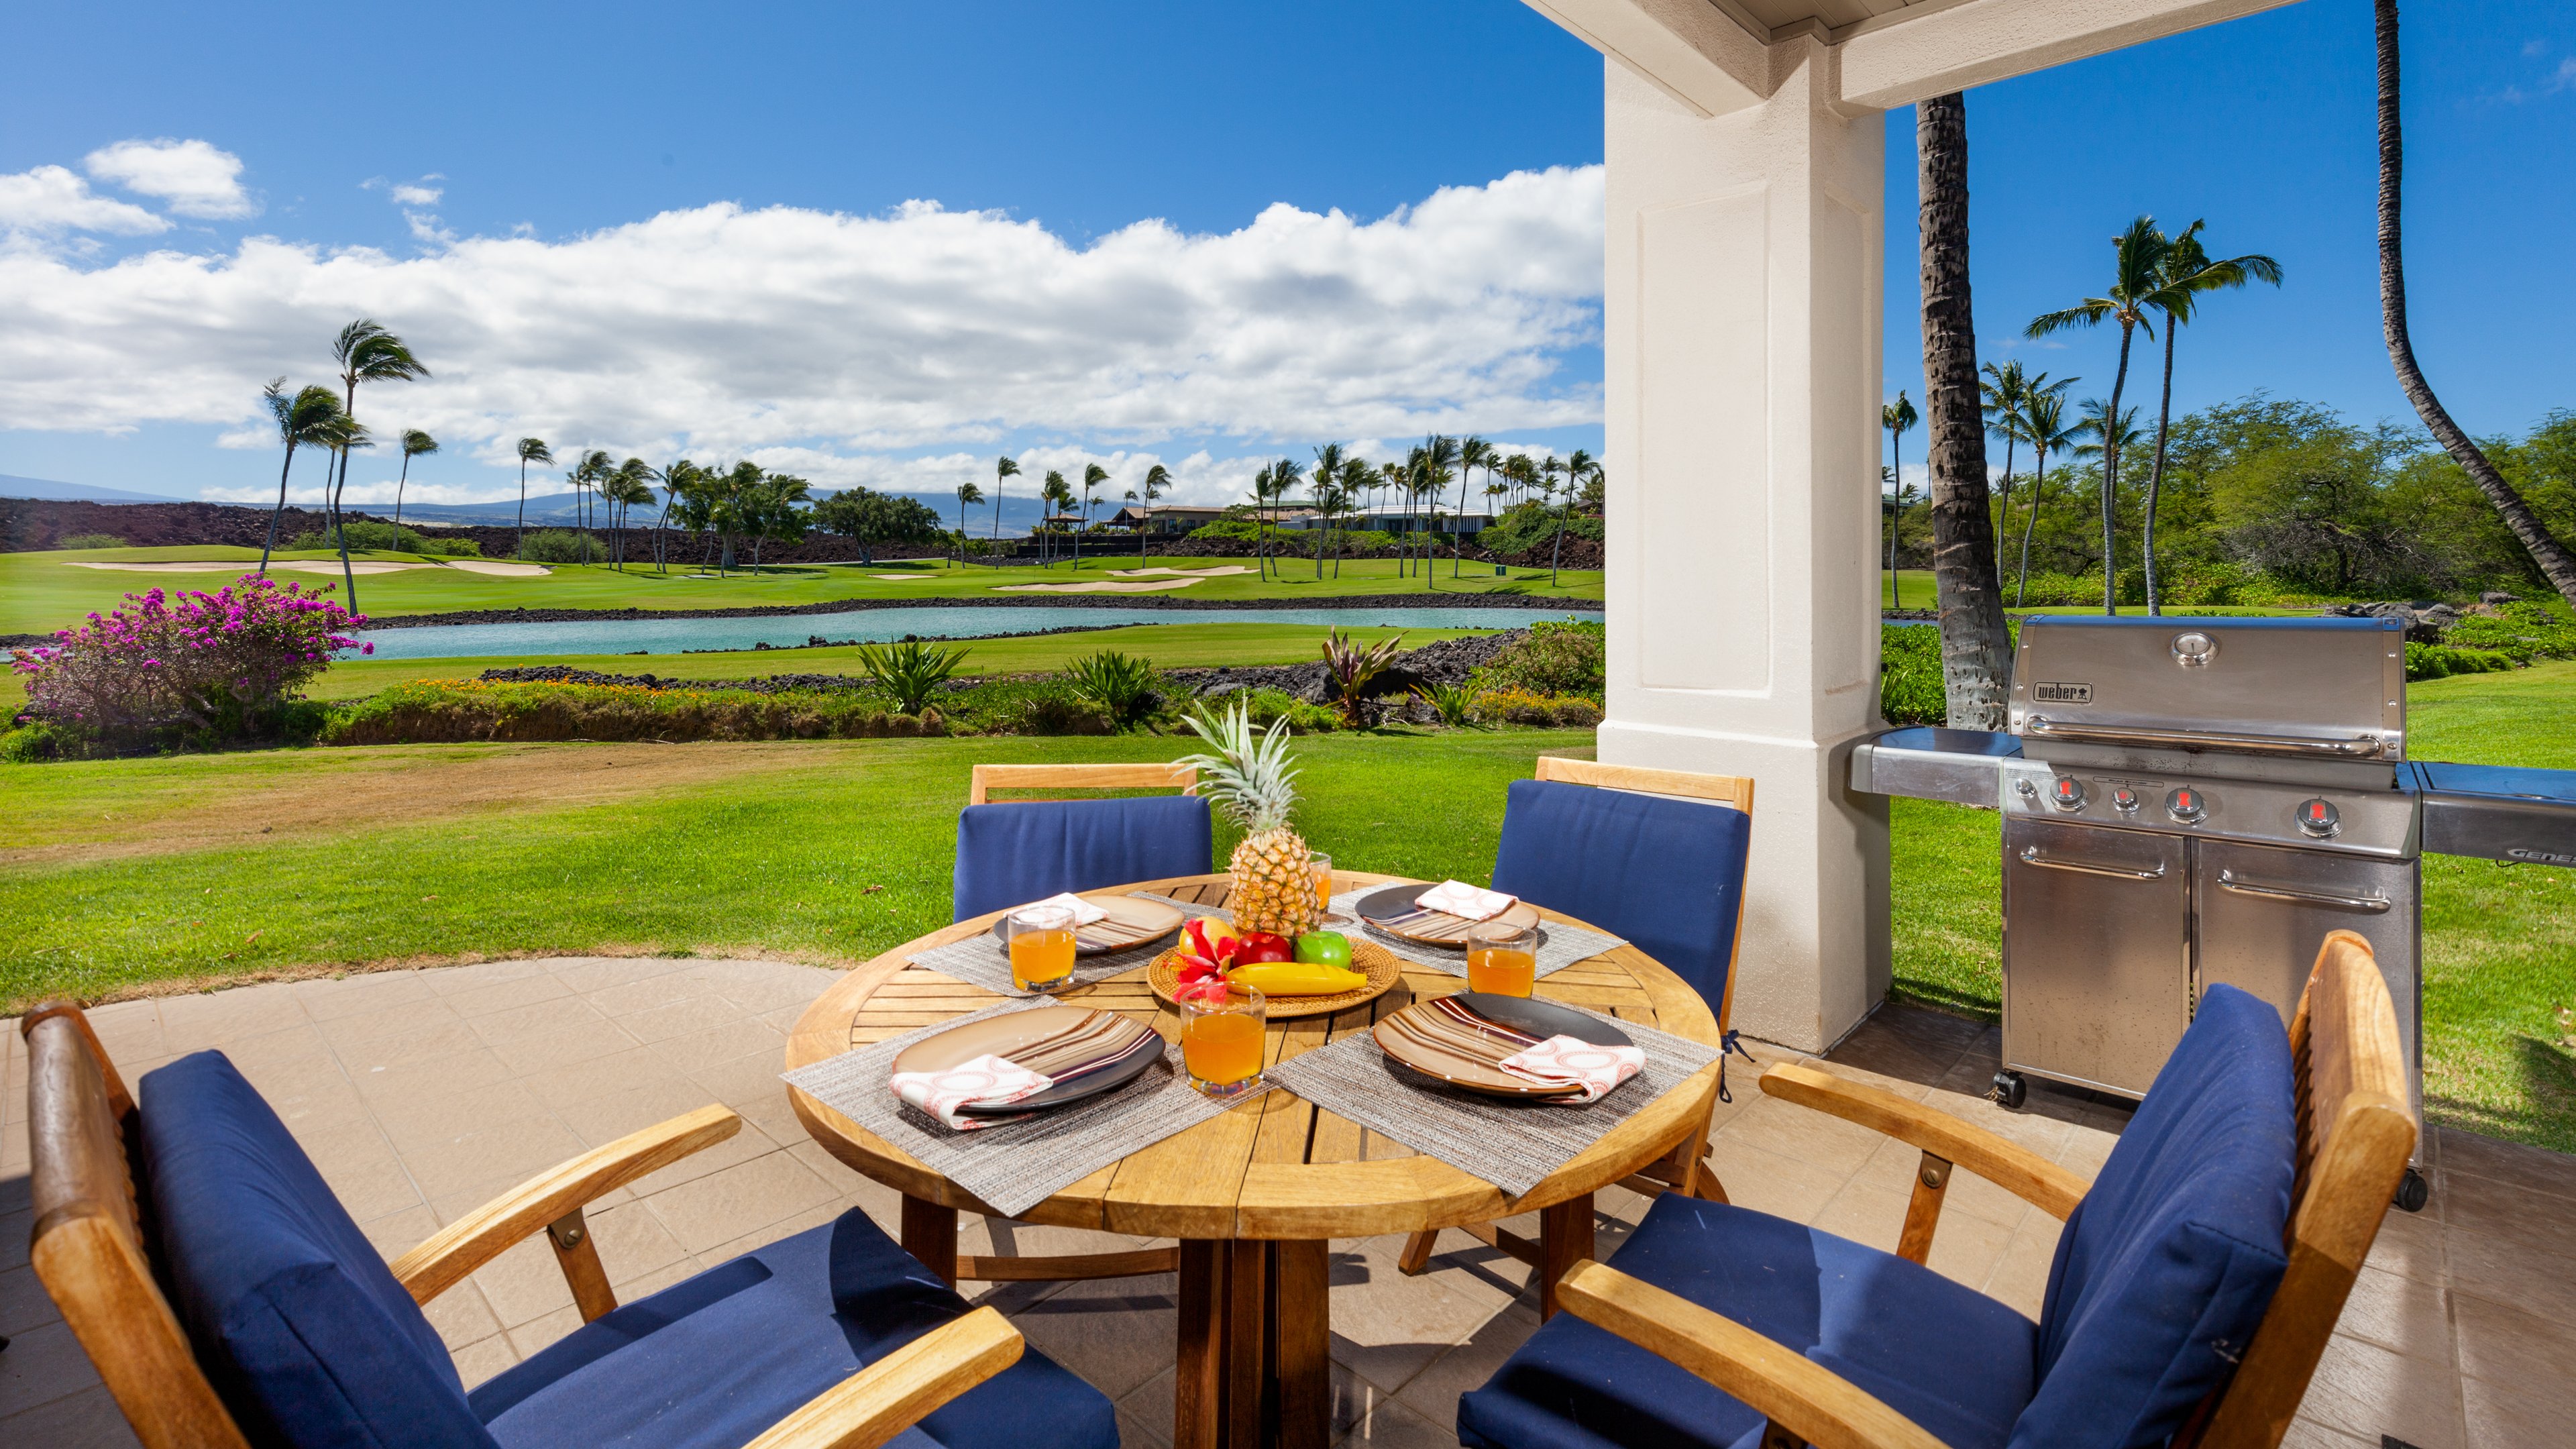 Enjoy a nice meal on Lanai grilled on the high-end Weber Grill